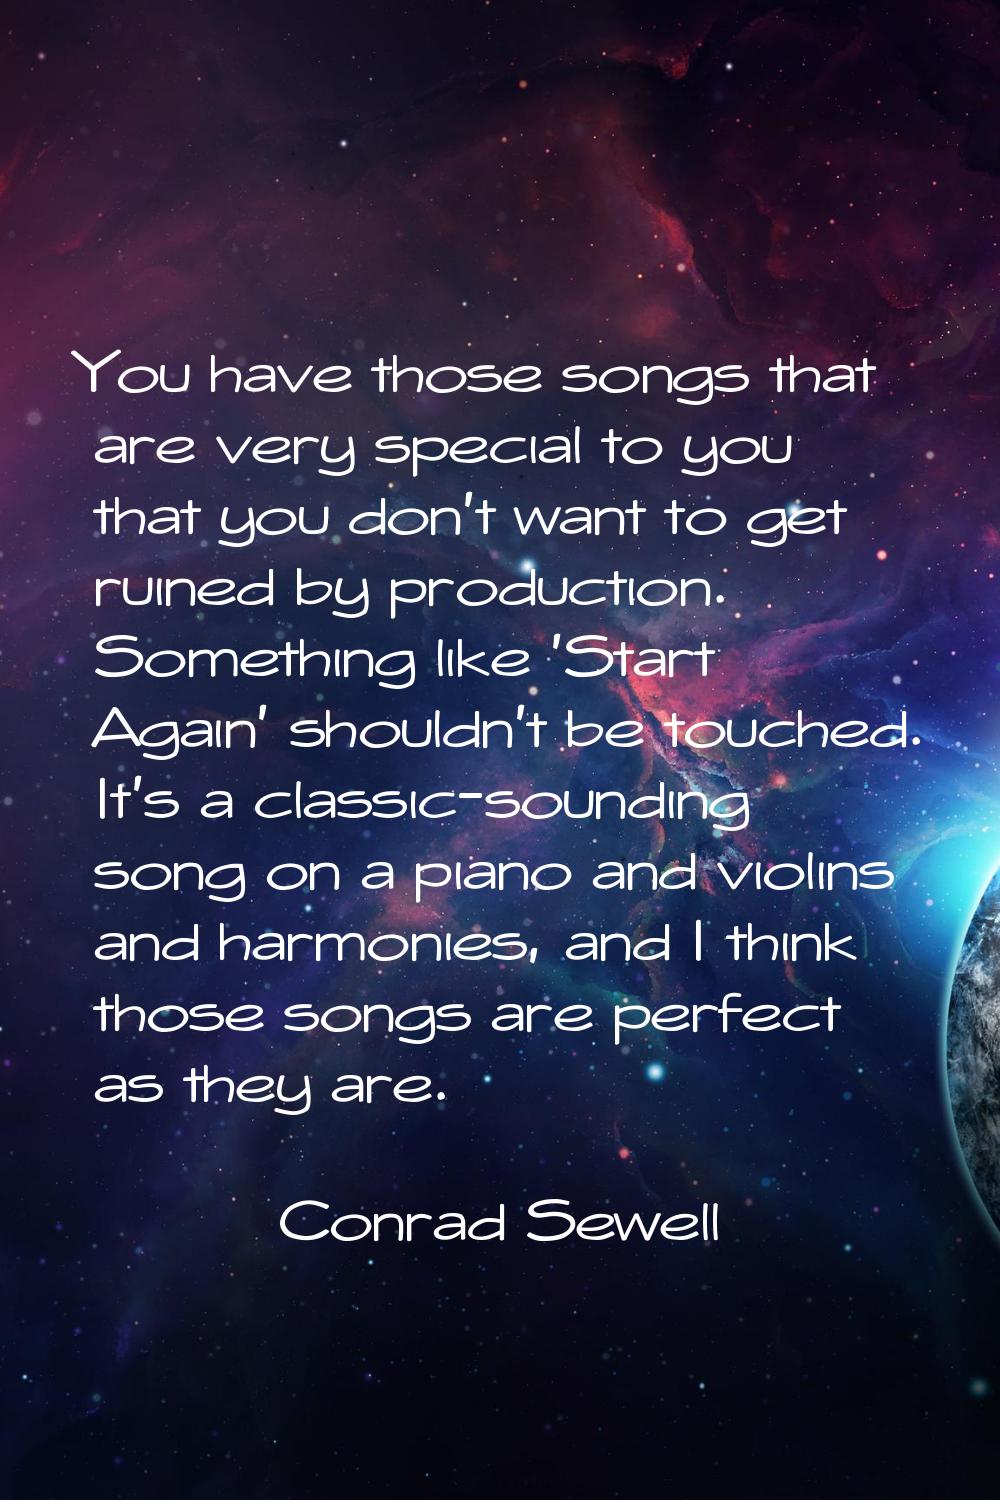 You have those songs that are very special to you that you don't want to get ruined by production. 